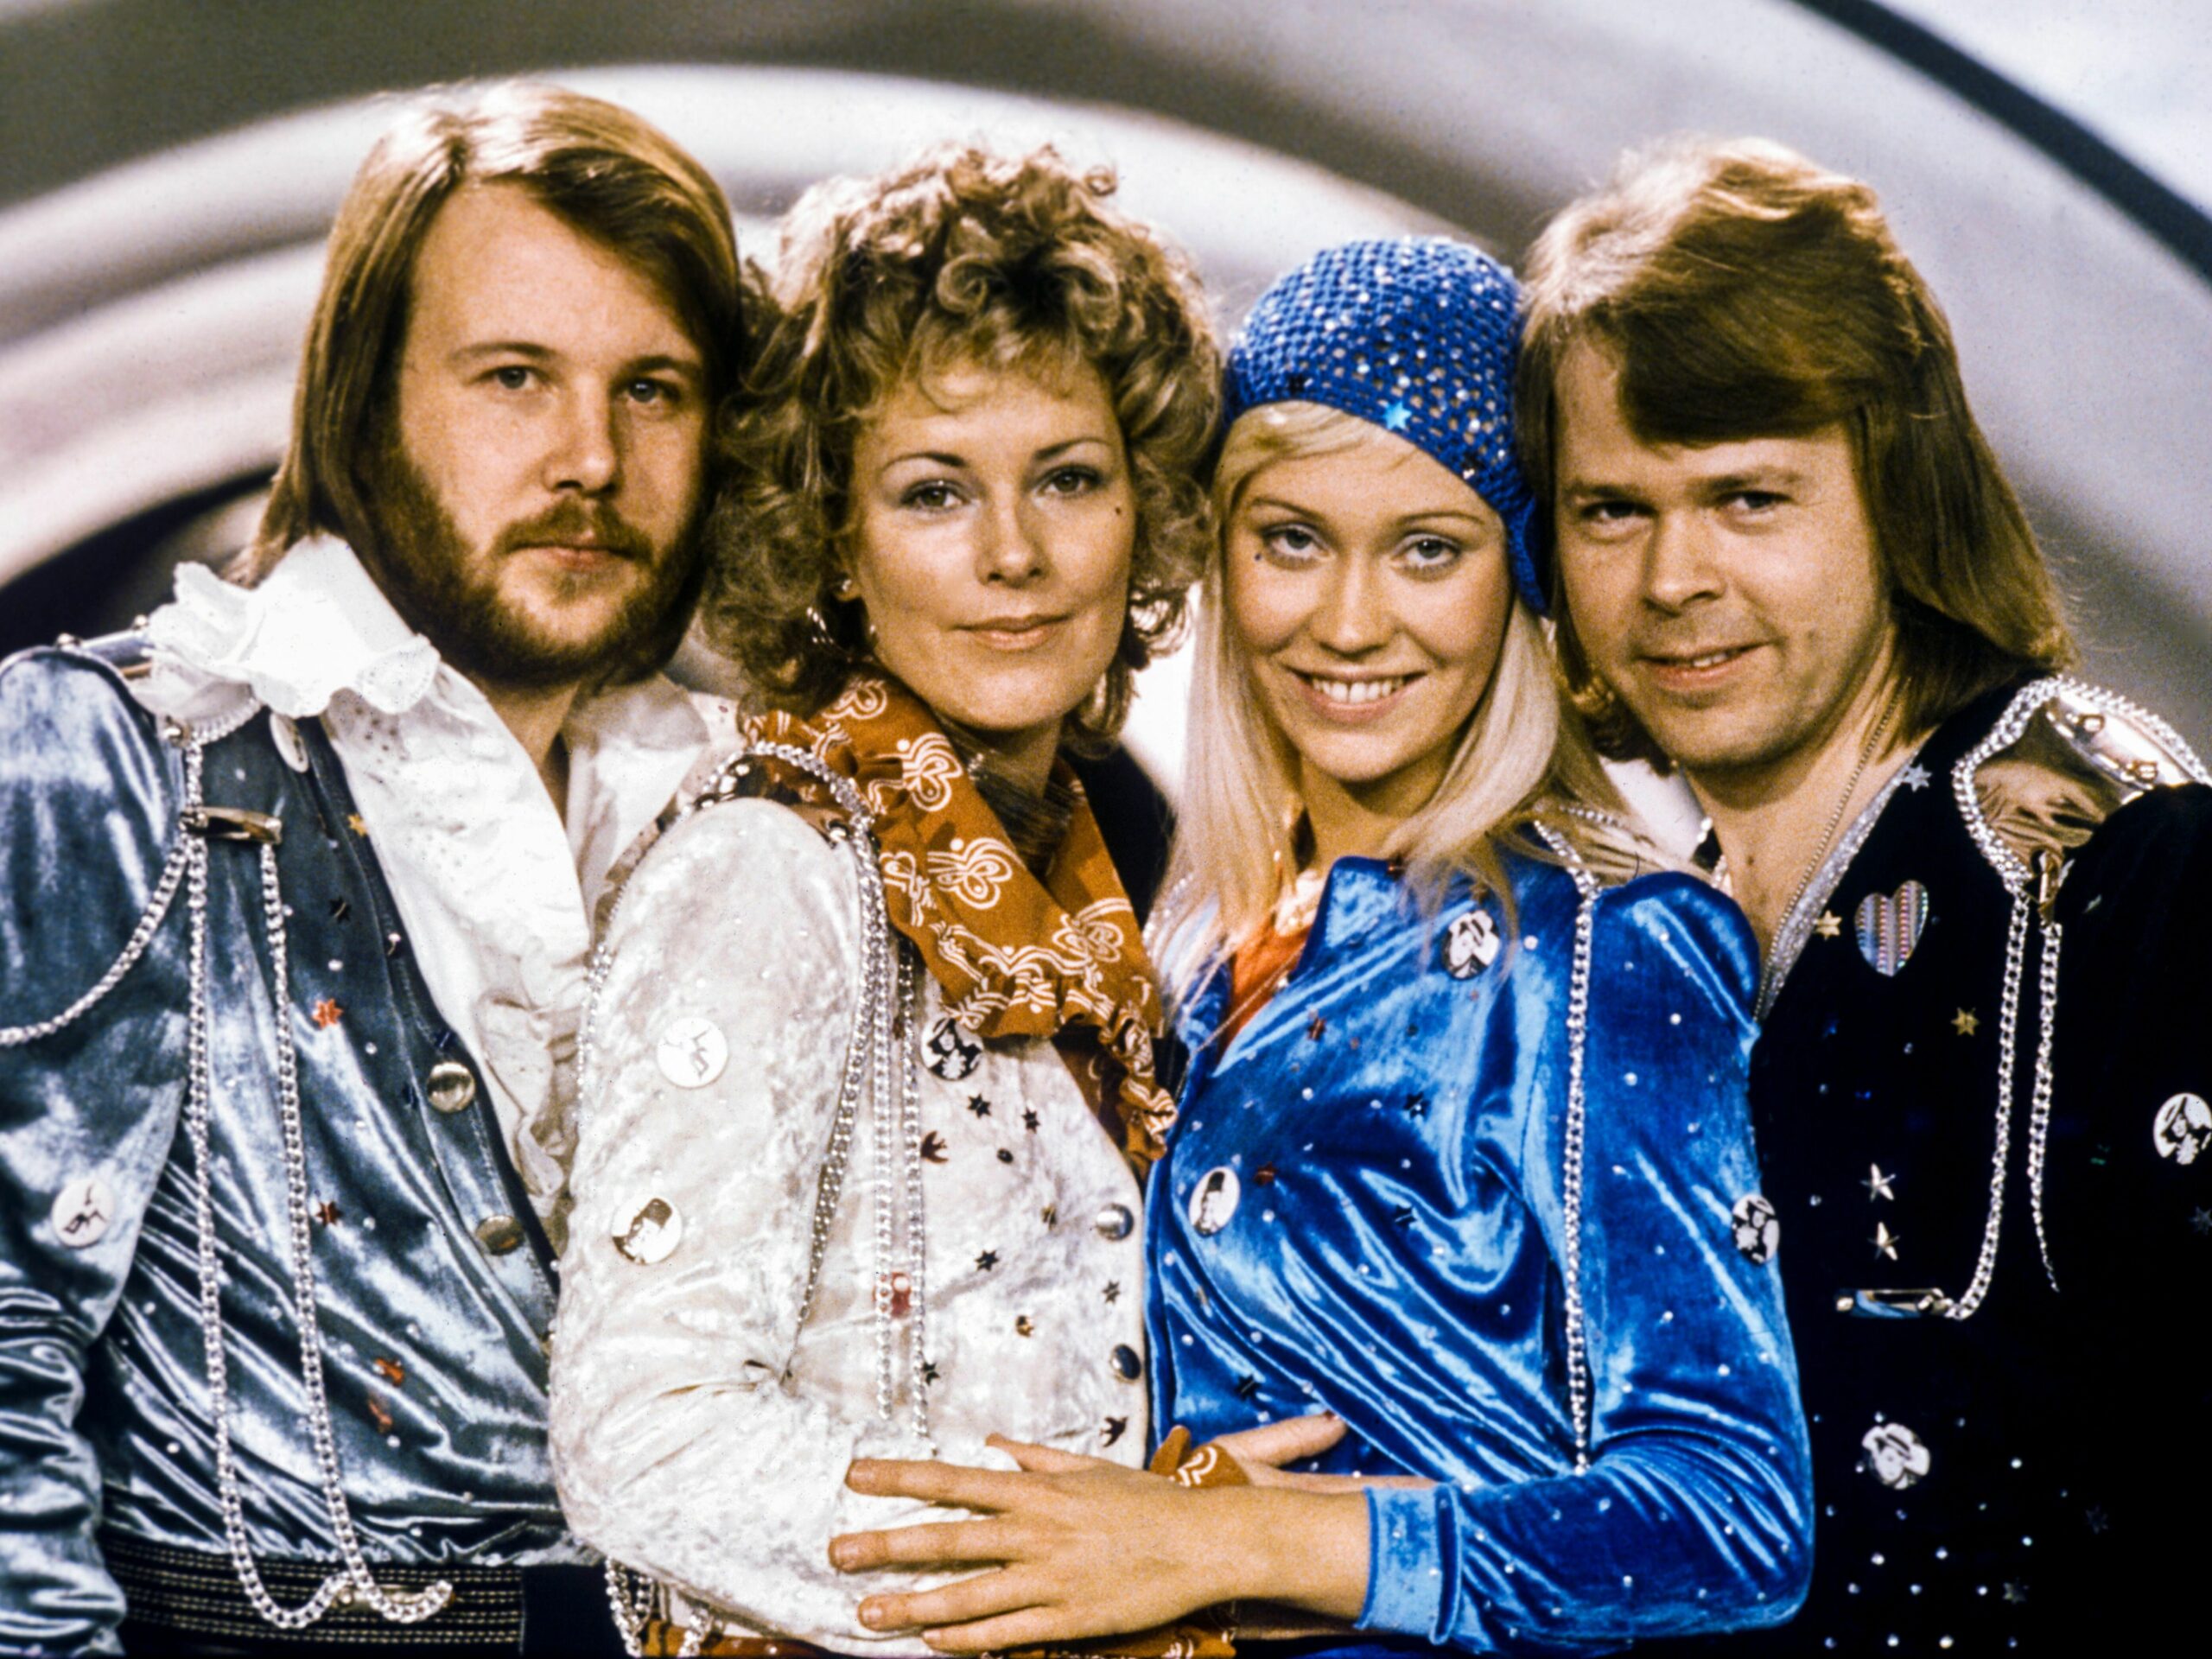 Swedish pop giants ABBA, shown here posing in Stockholm in 1974, have been named to the Library of Congress' National Recording Registry.